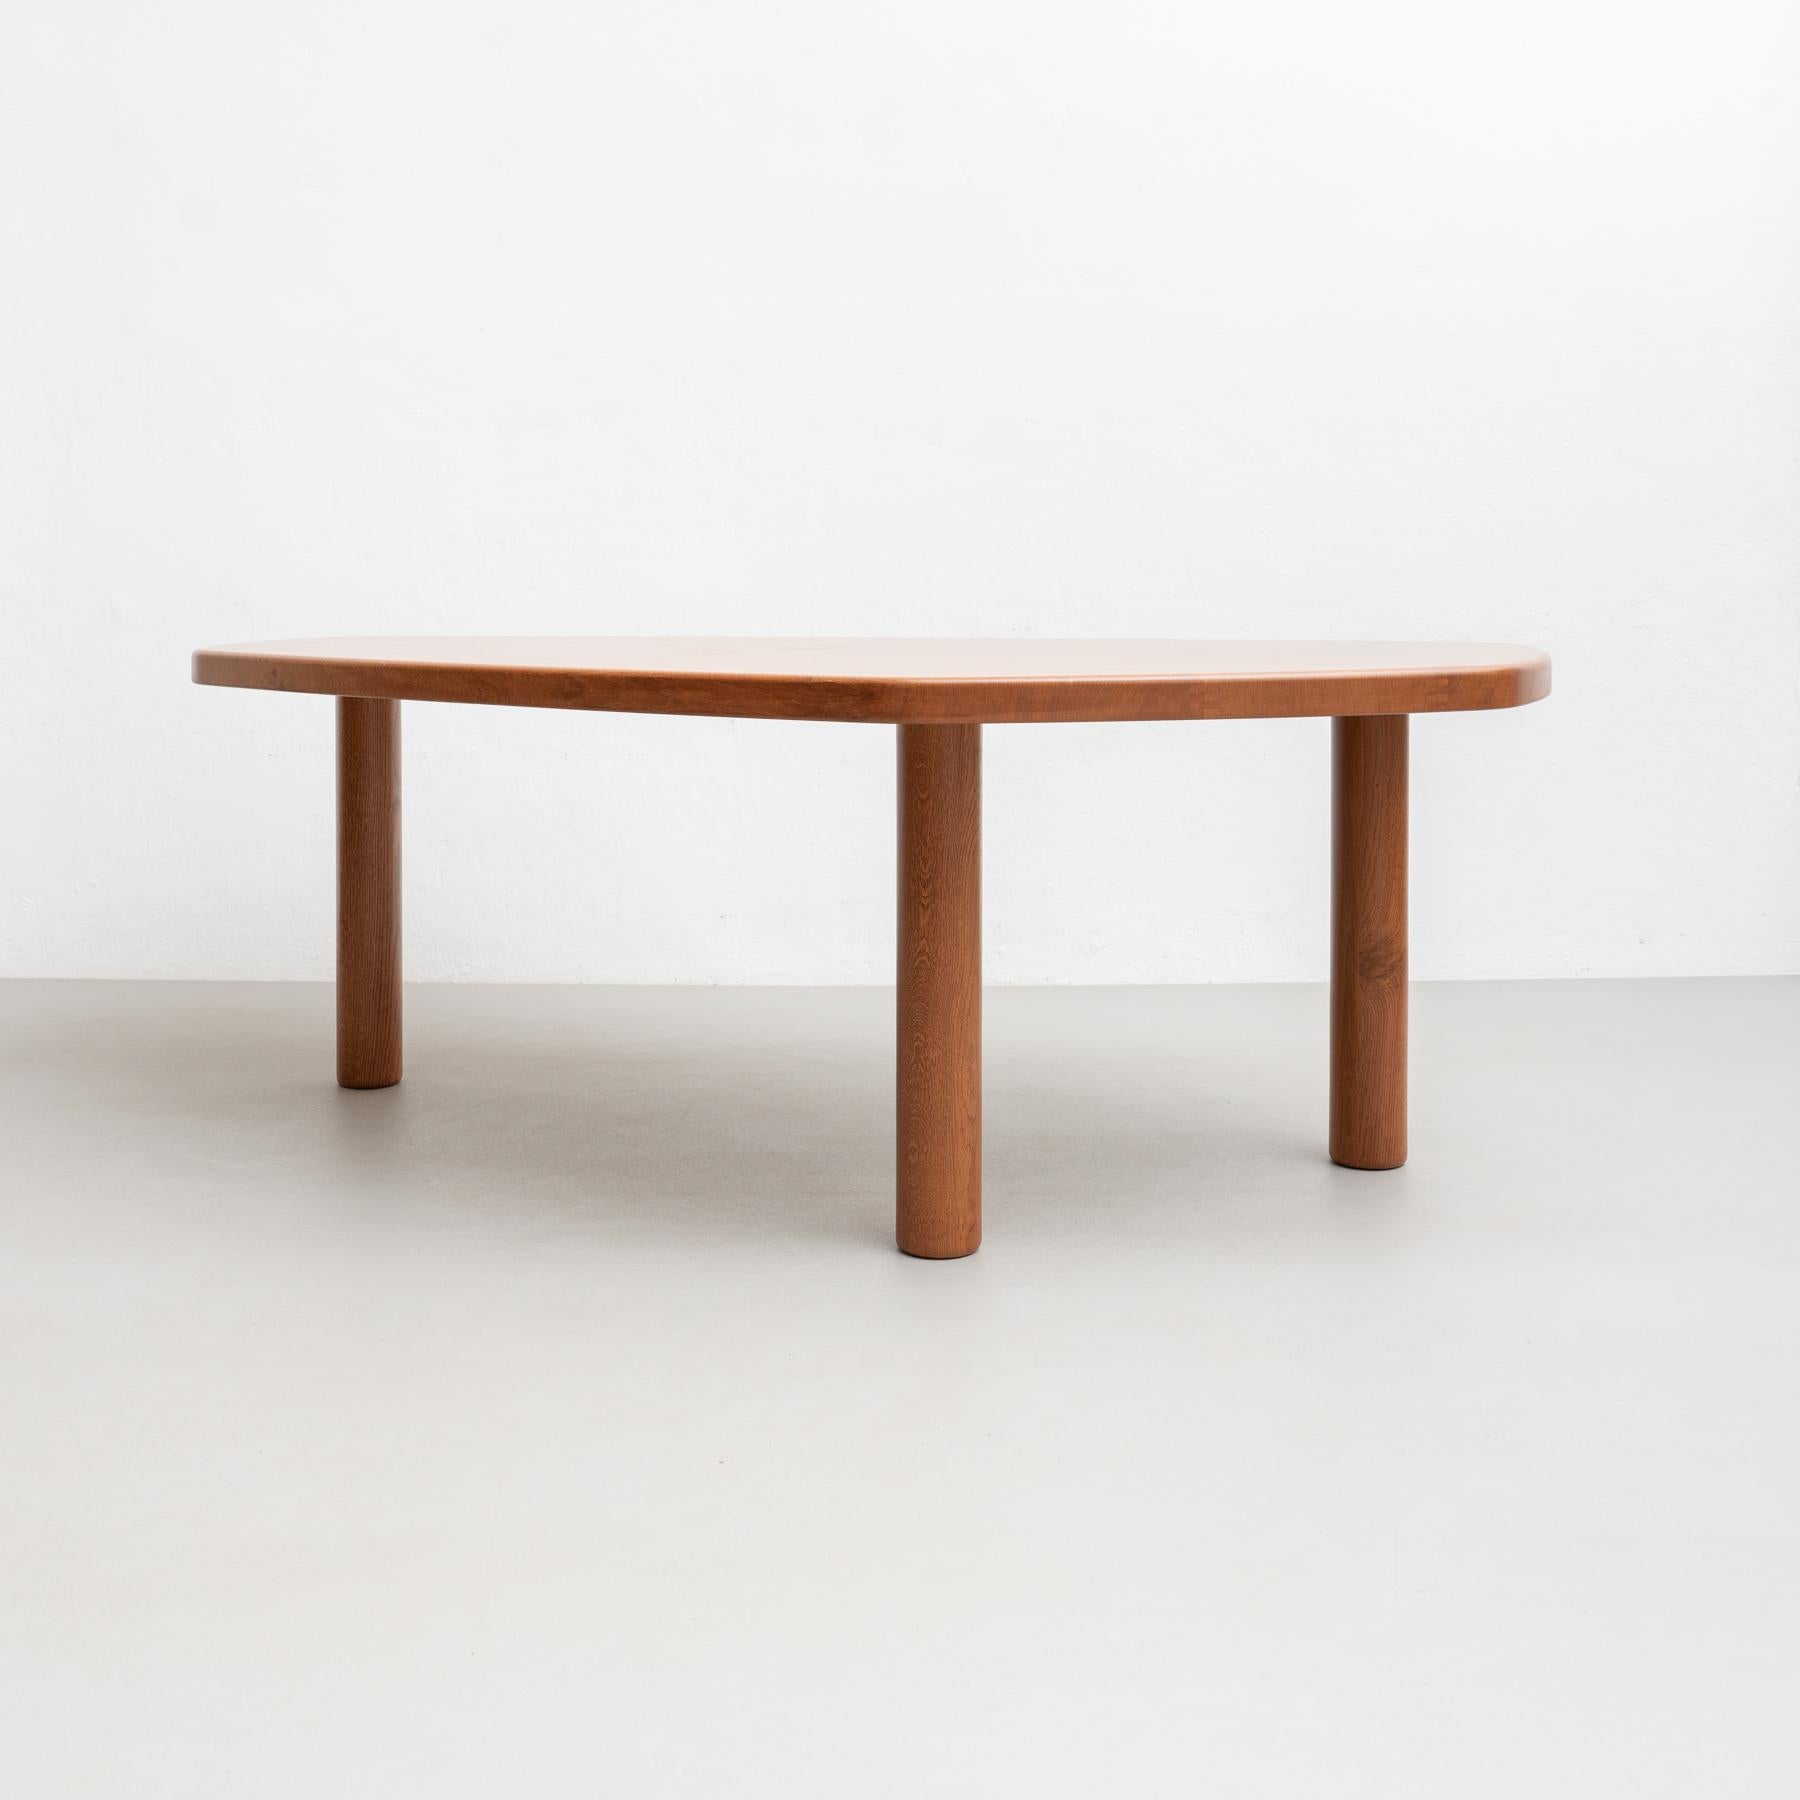 Large freeform dining table by dada - est. manufactured in Barcelona, 2017.

Oakwood

Measures: 112.5 cm D x 220 cm W x 75 cm H 

Production delay: 7-8 weeks

There is the possibility of making it in different measures.


Dada Est. /